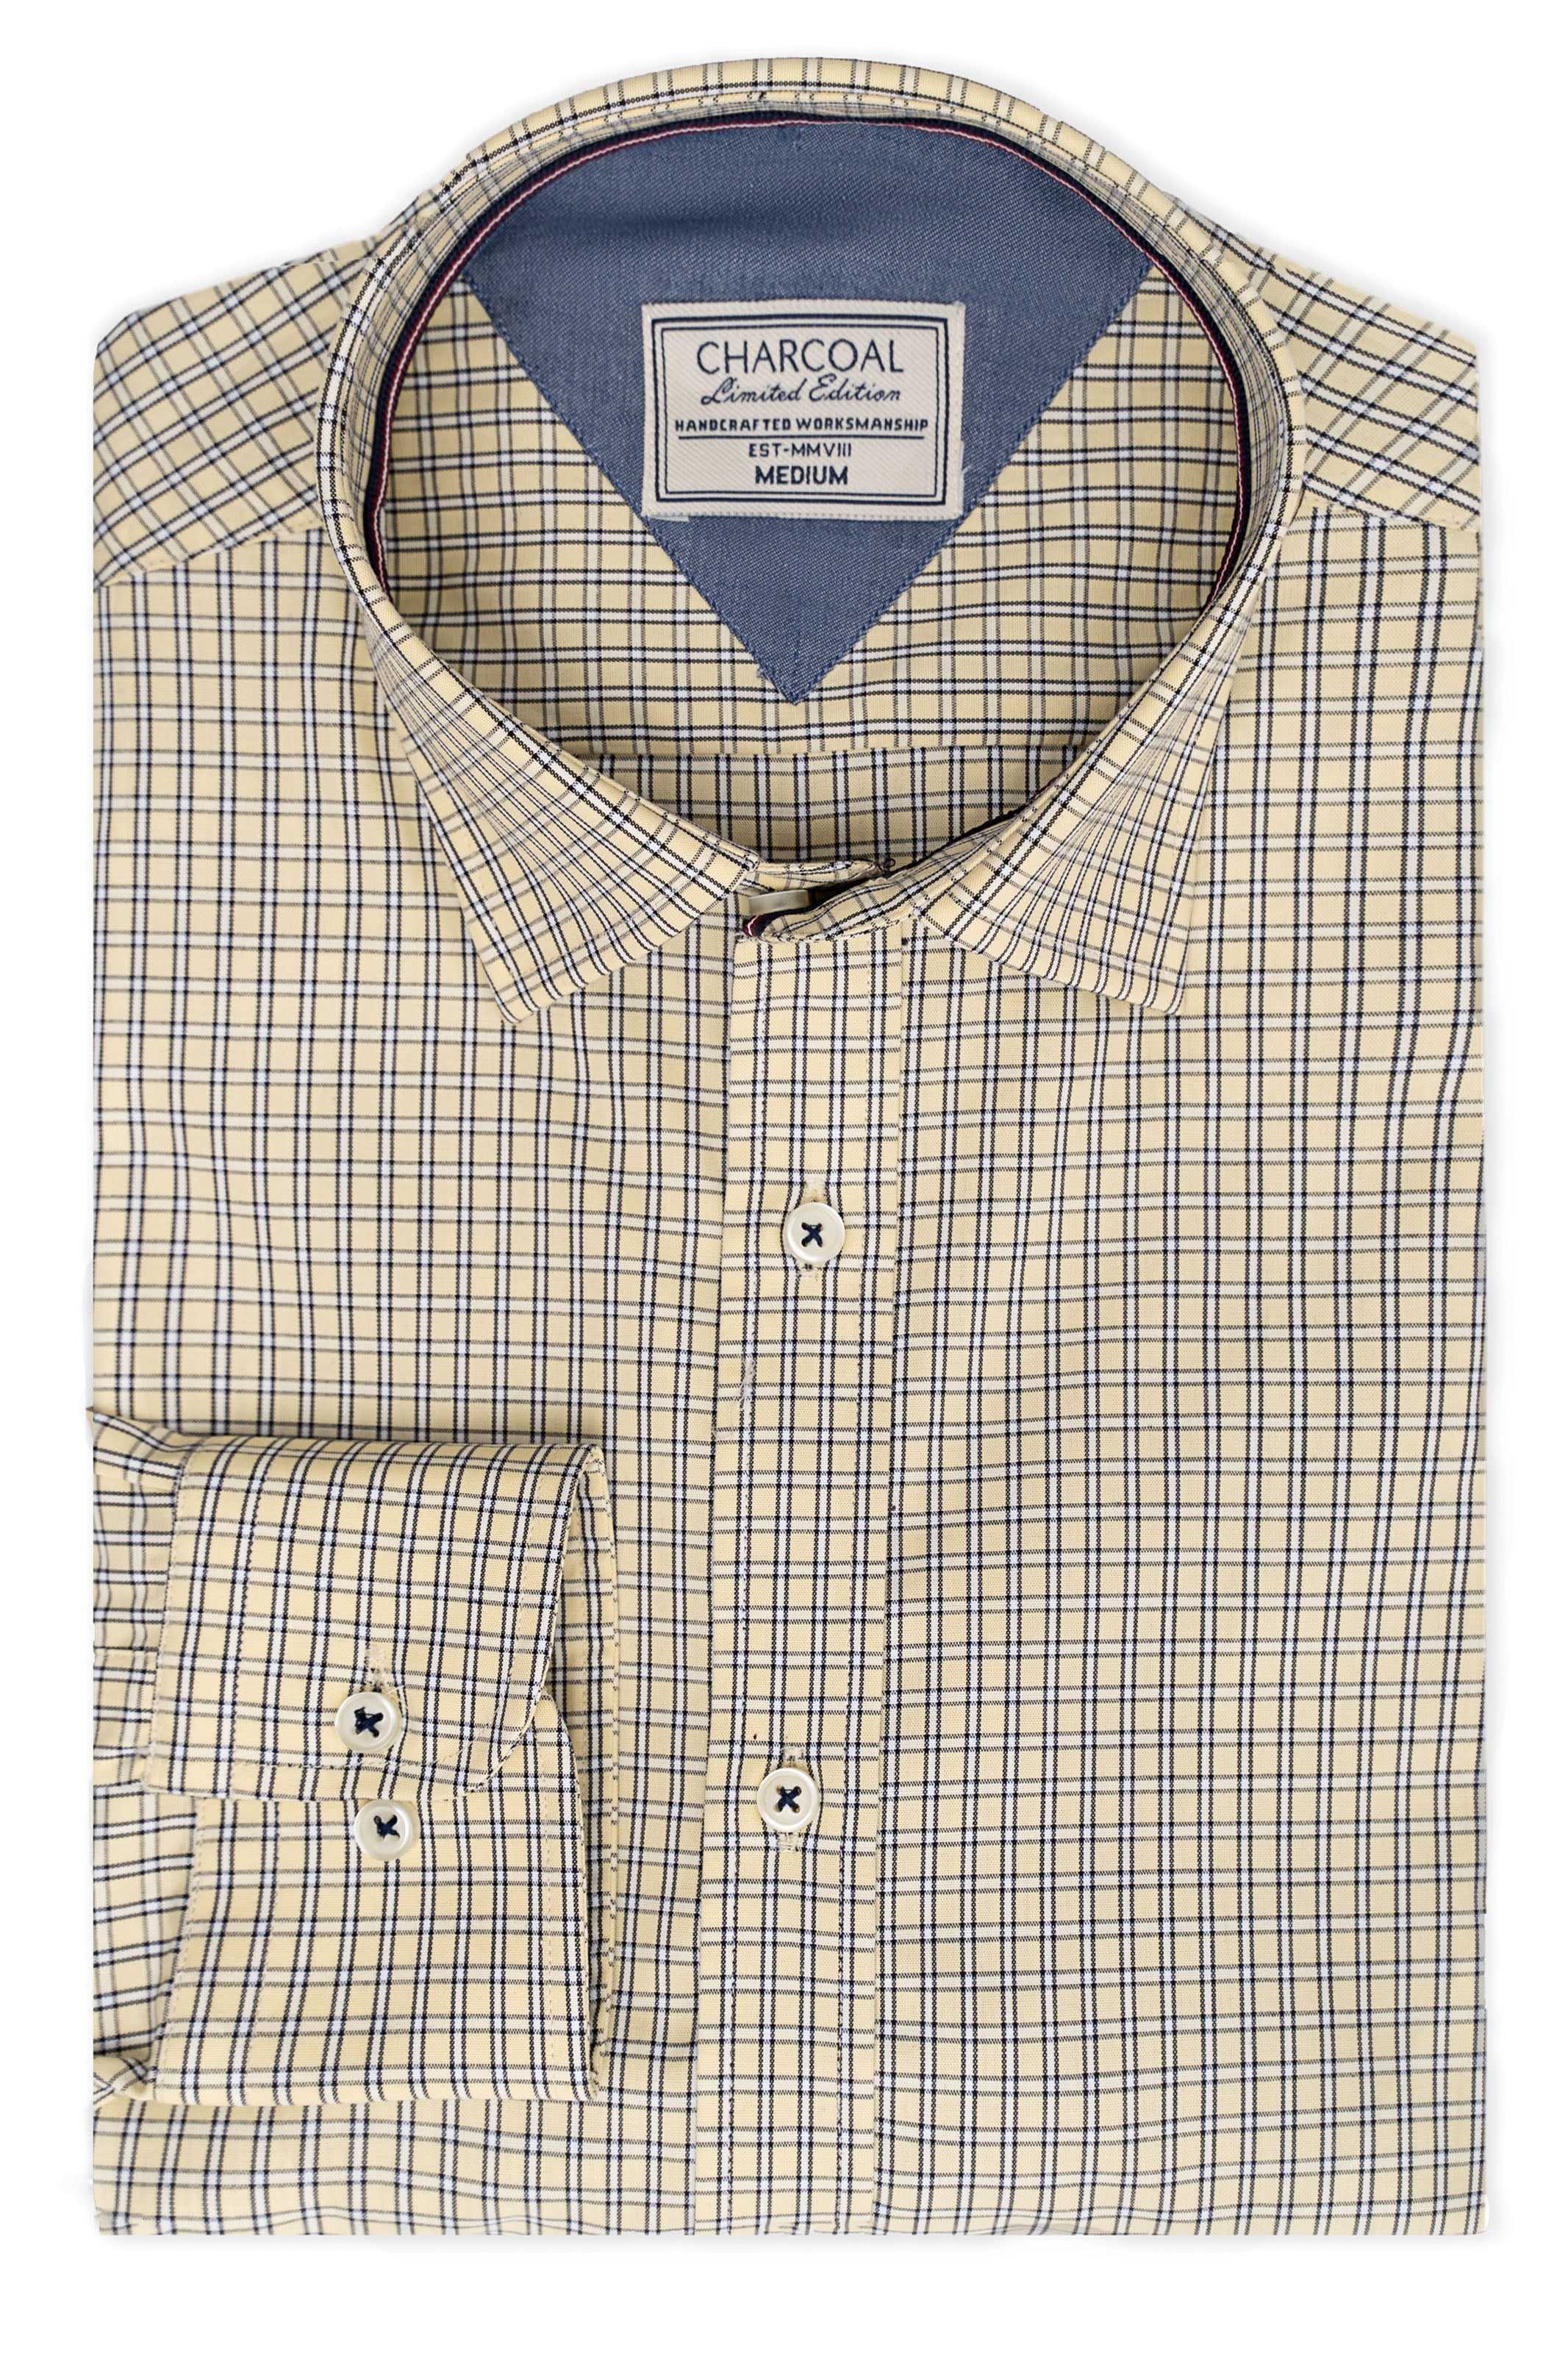 LIMITED EDITION SHIRTS YELLOW WHITE CHECK